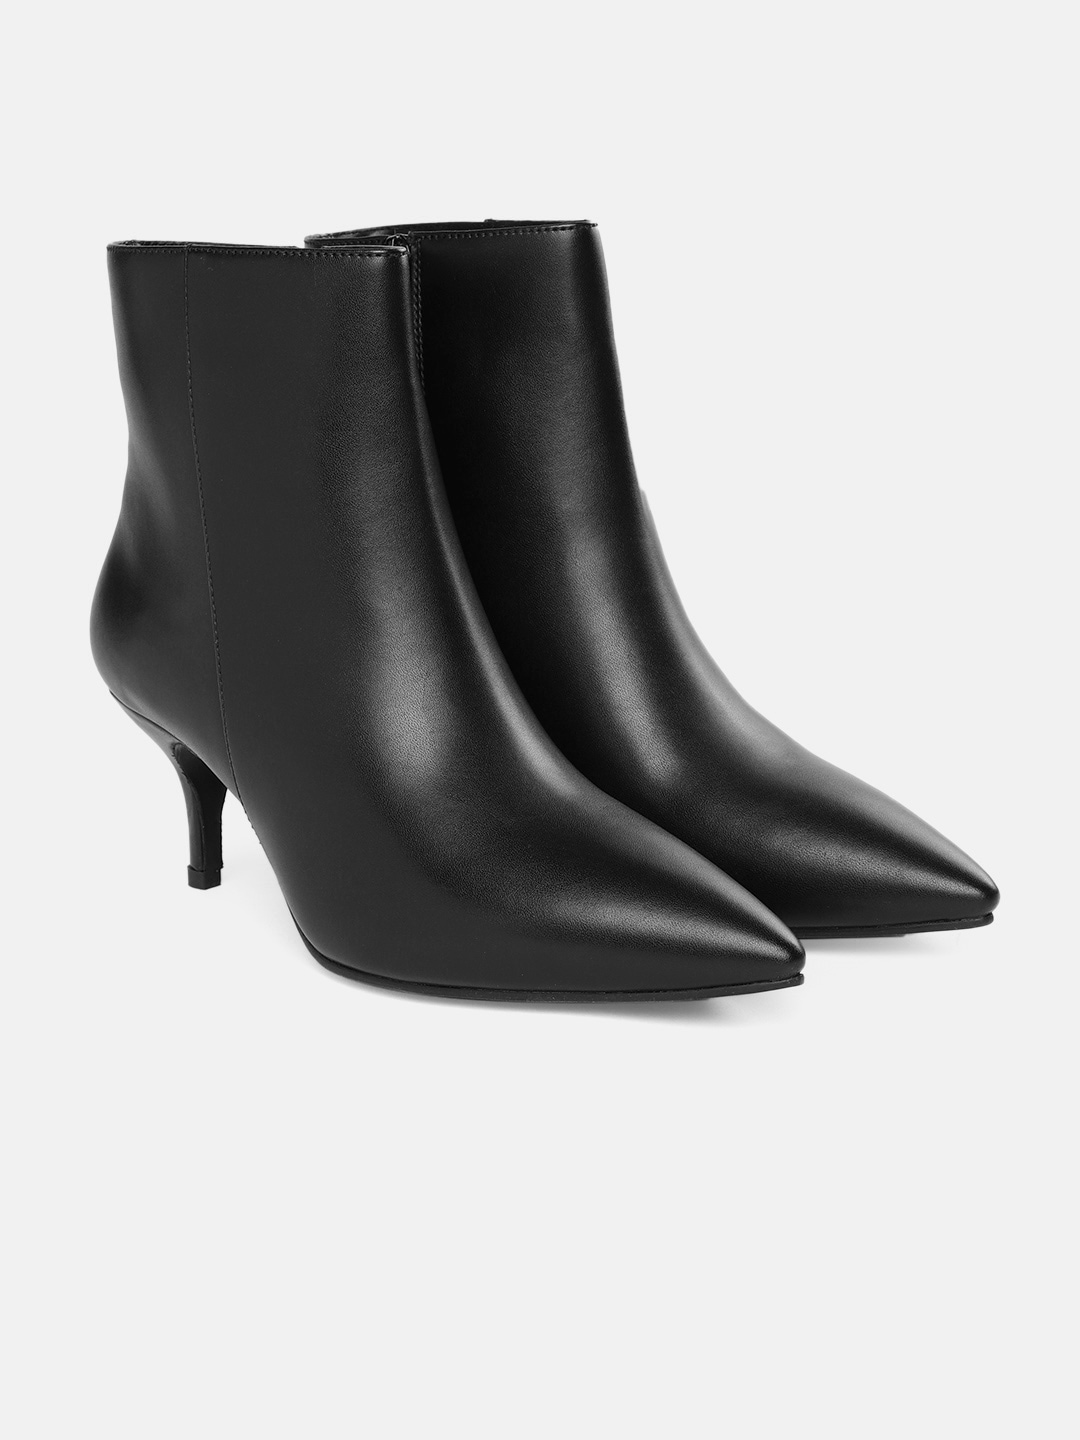 CORSICA Black Heeled Boots Price in India